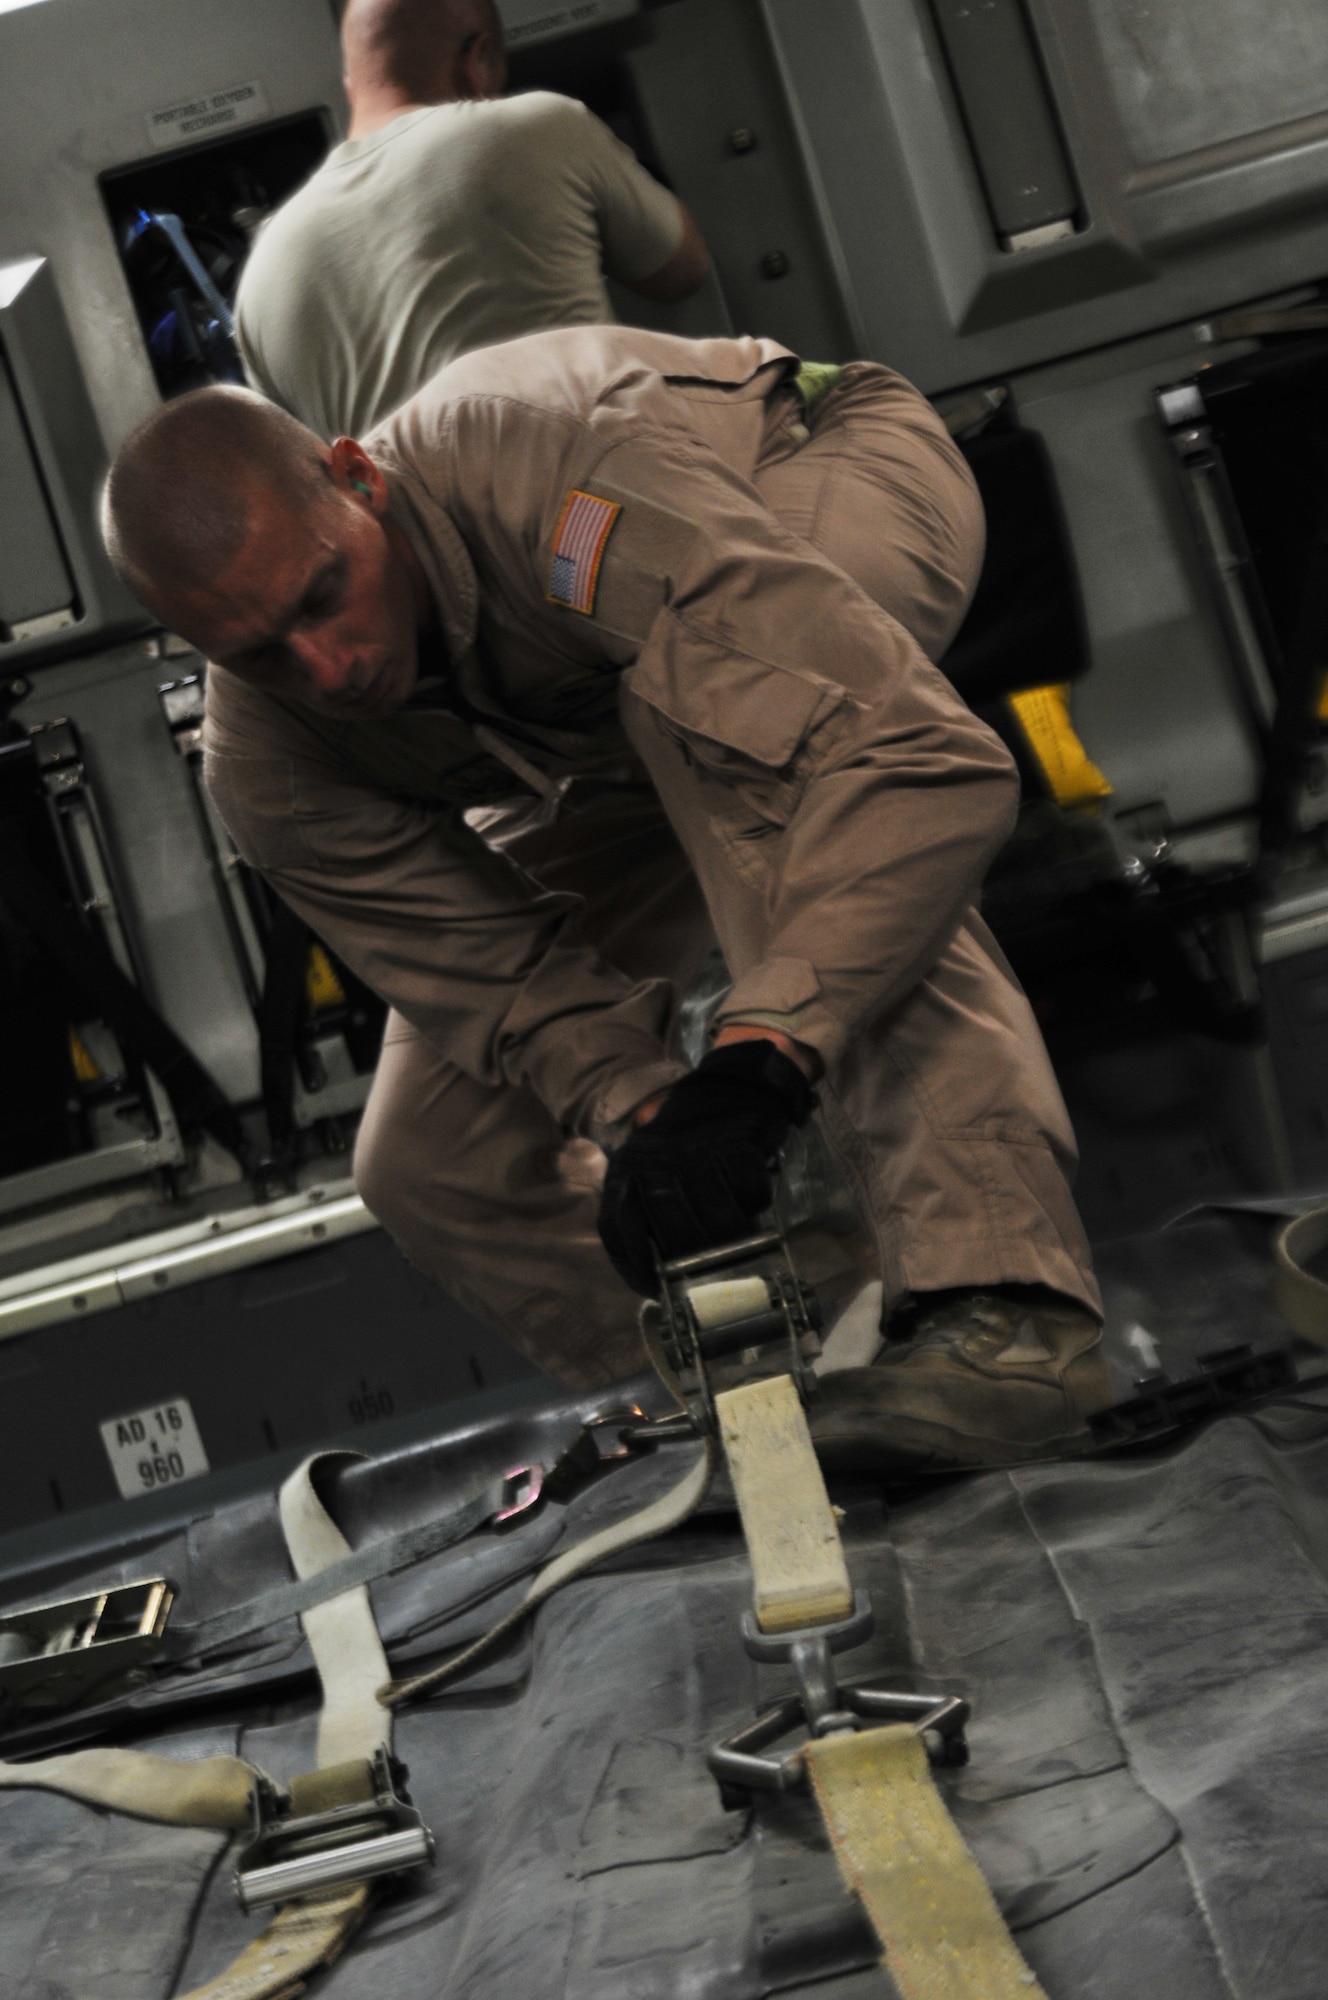 Staff Sgt. Michael Furlough, 379th Expeditionary Logistics Readiness Squadron aerial bulk fuel delivery system team member, loosens straps on a fuel bladder as he prepares to fill the bladder with aviation gasoline Oct. 20, 2011, at an undisclosed location in Southwest Asia. The fuel bladders are used to transport various fuels to bases throughout the area of responsibility. Furlough, a native of White House, Tenn., is deployed from Joint Base McGuire-Dix- Lakehurst, N.J. (U.S. Air Force photo/Senior Airman Eric Summers Jr.) 